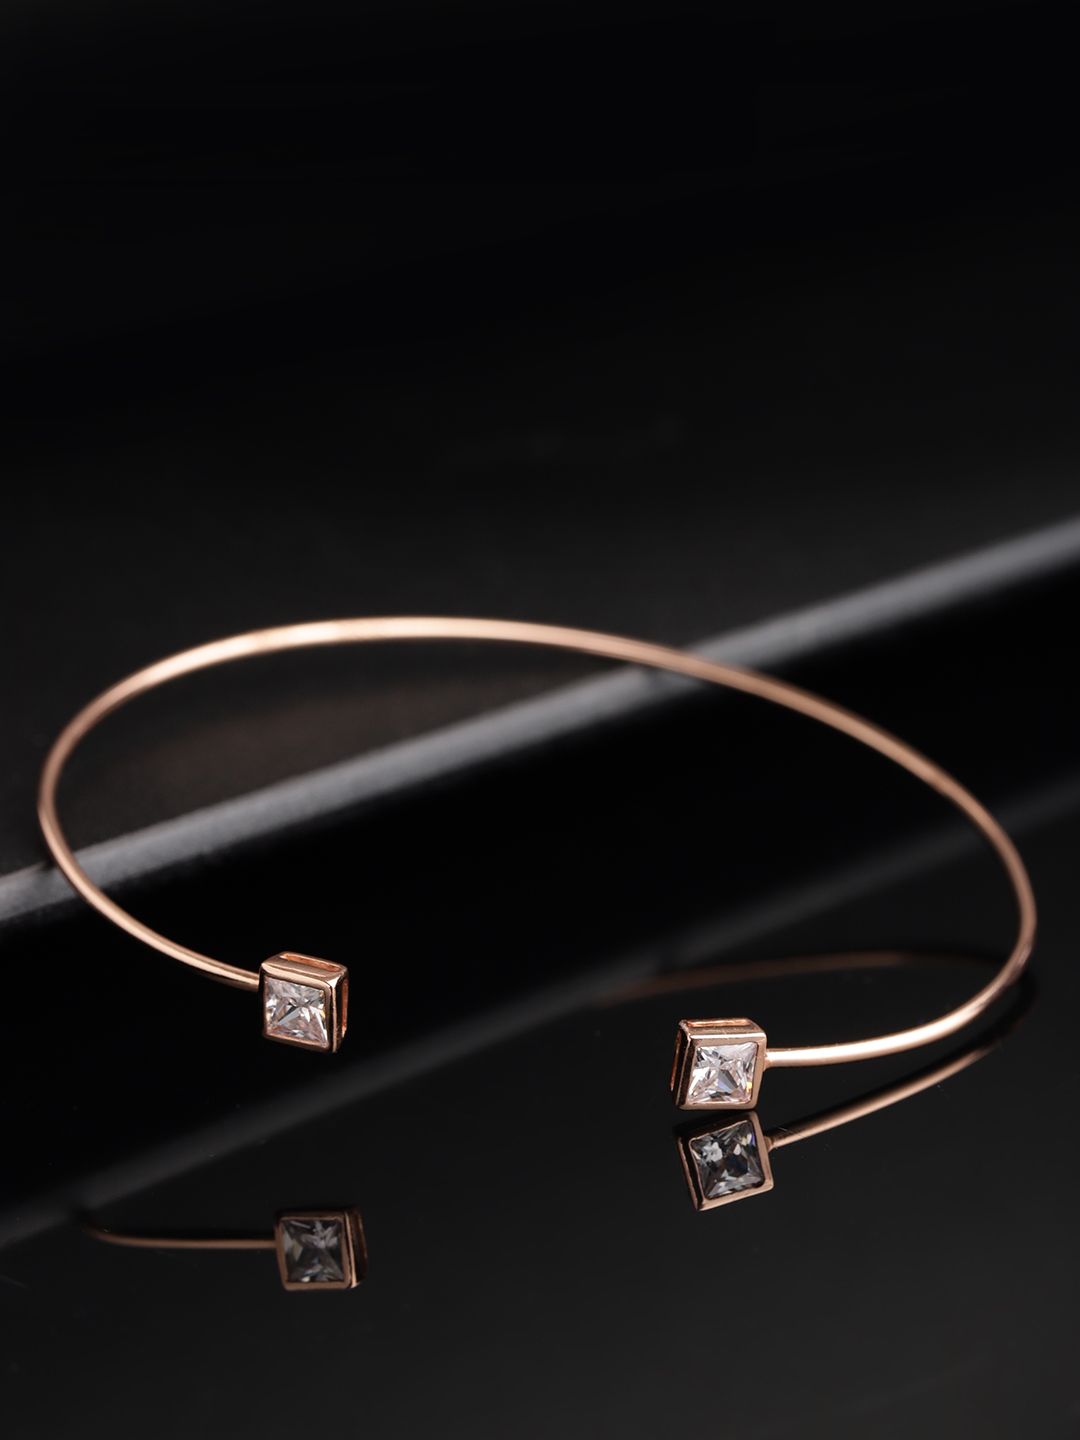 Carlton London Rose Gold-Plated CZ Studded Cuff Bracelet Price in India